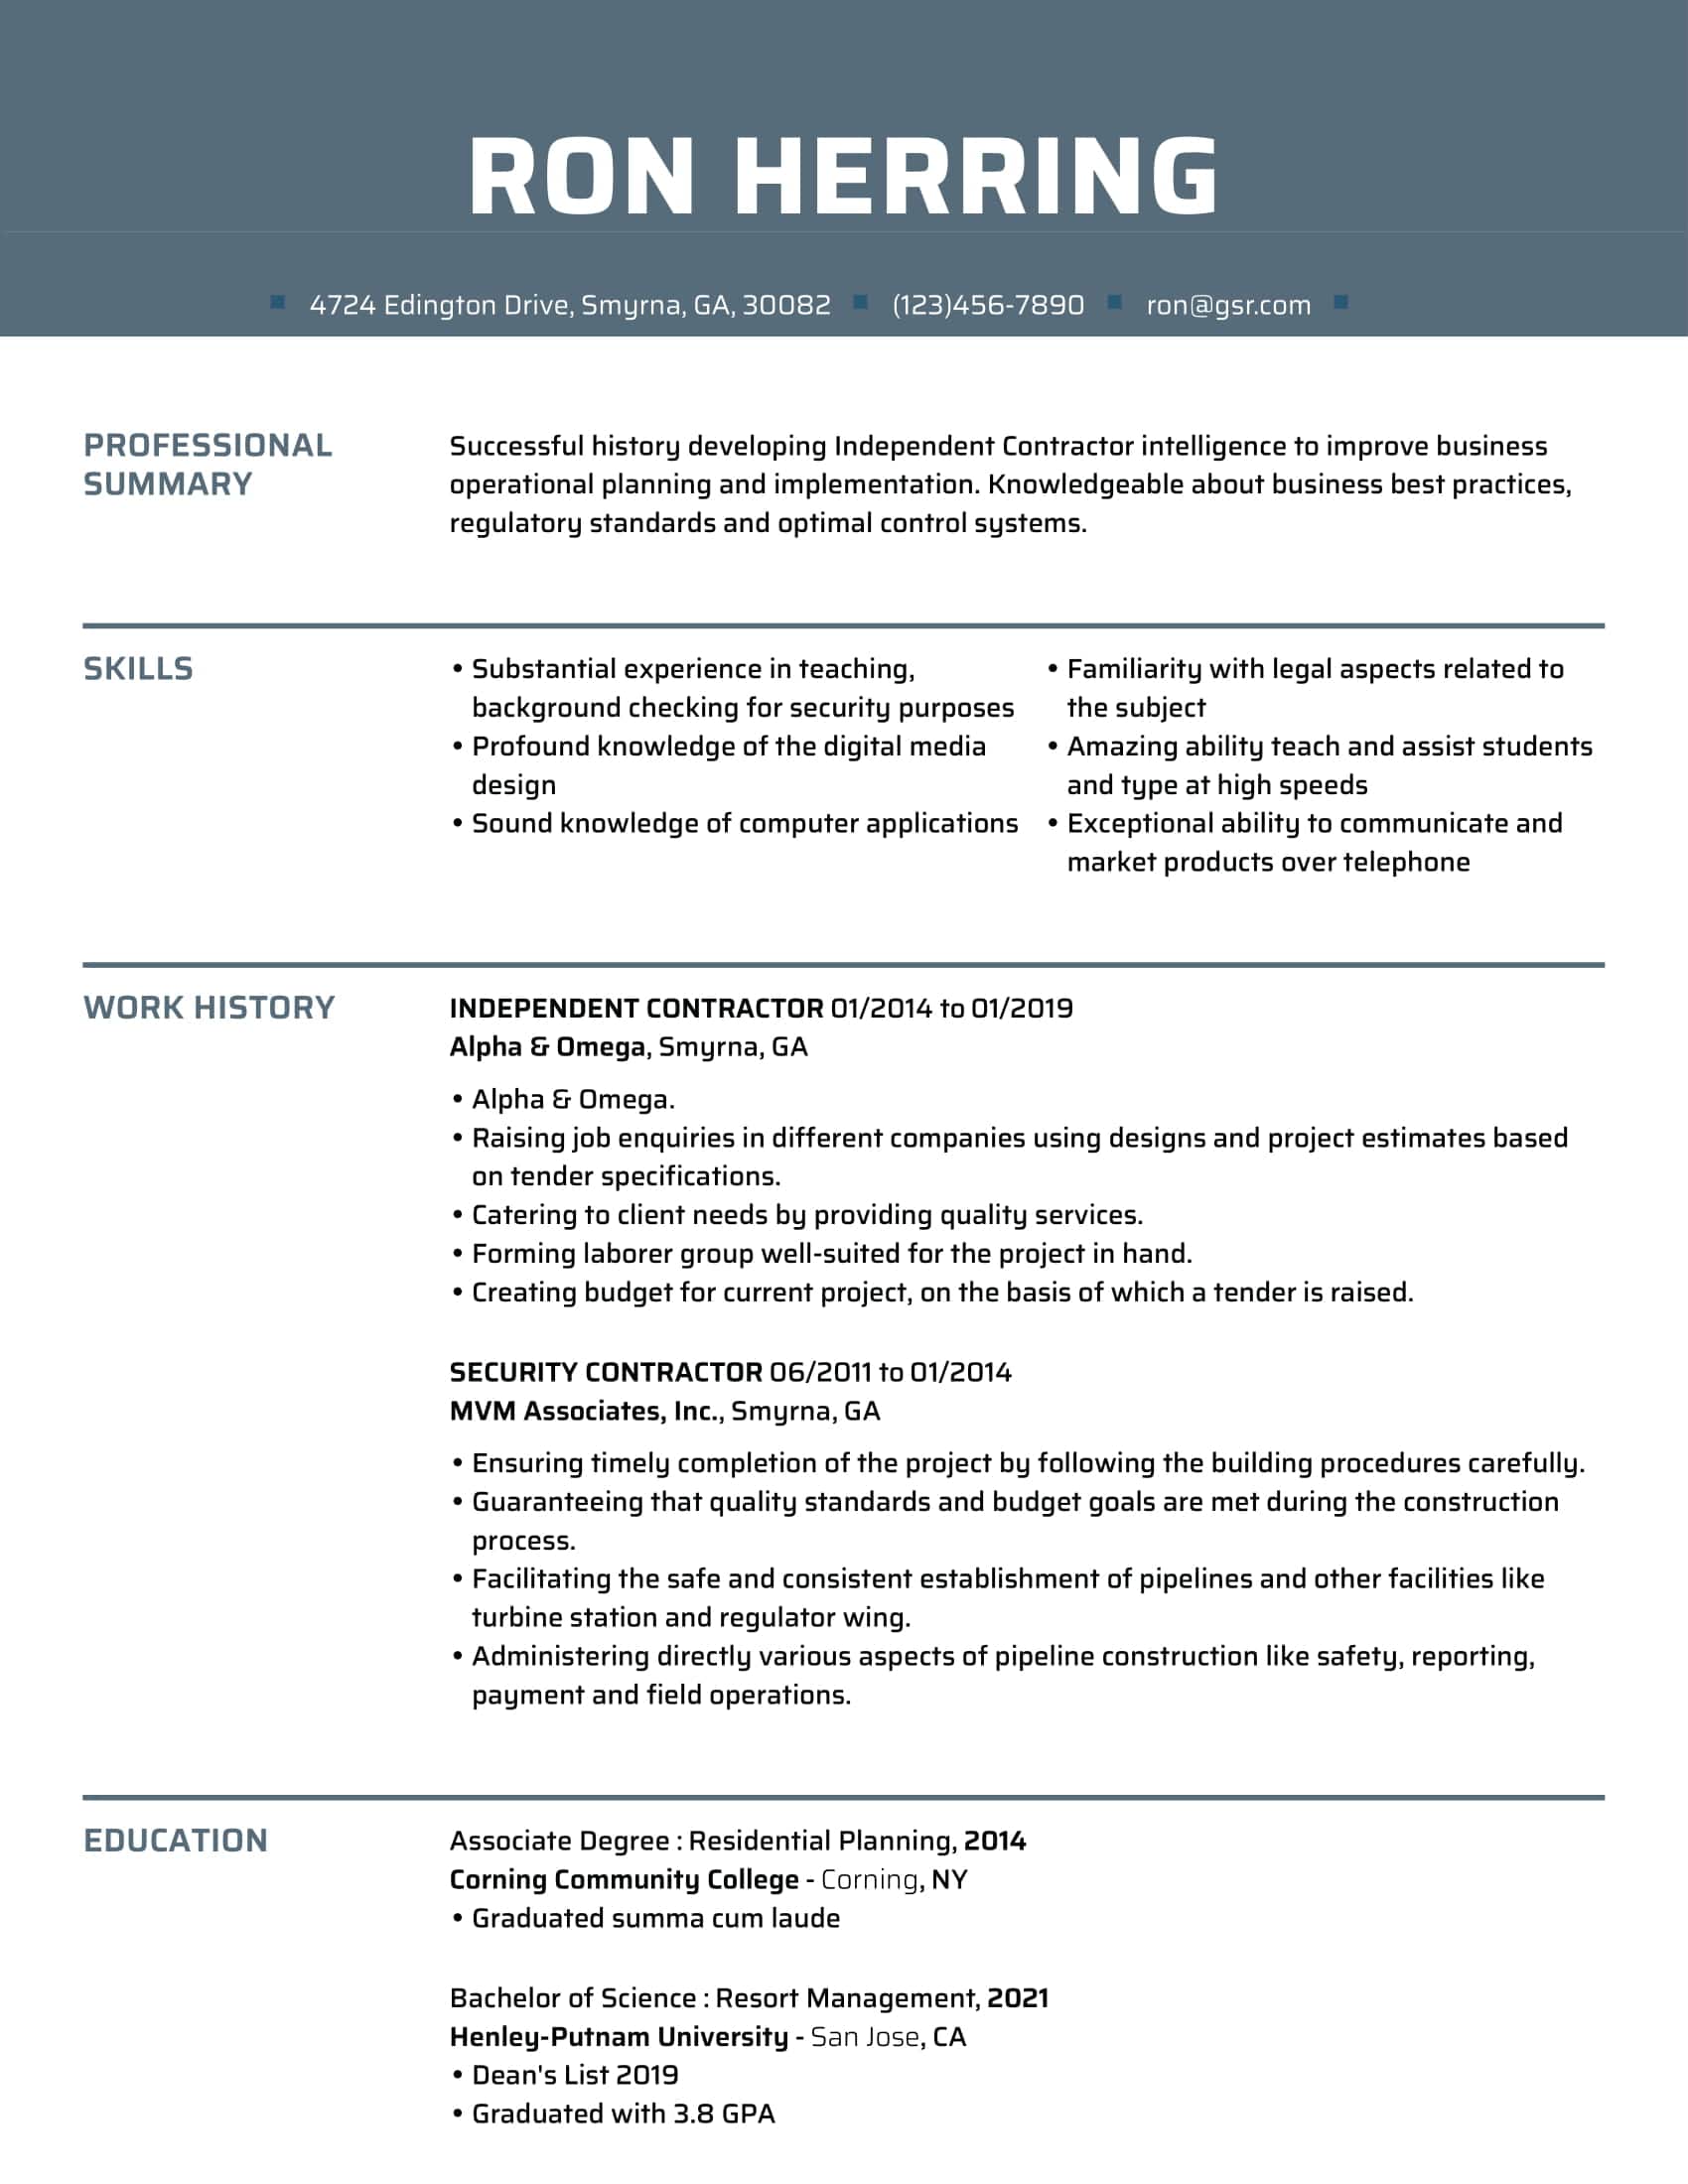 Resume Templates: Edit & Download in Minutes